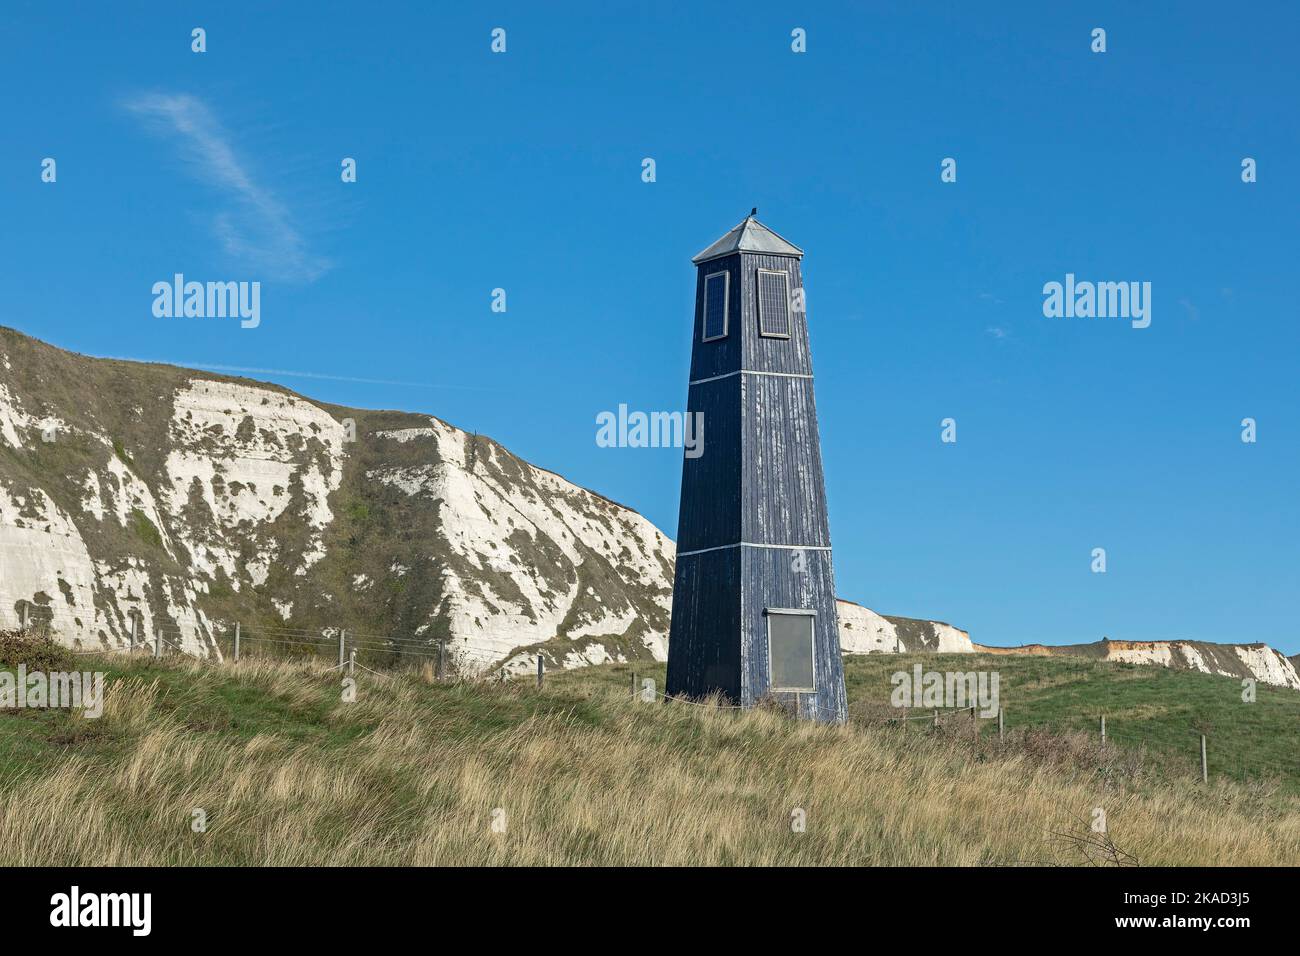 Tower, Samphire Hoe country park, Kent, England, Great Britain Stock Photo